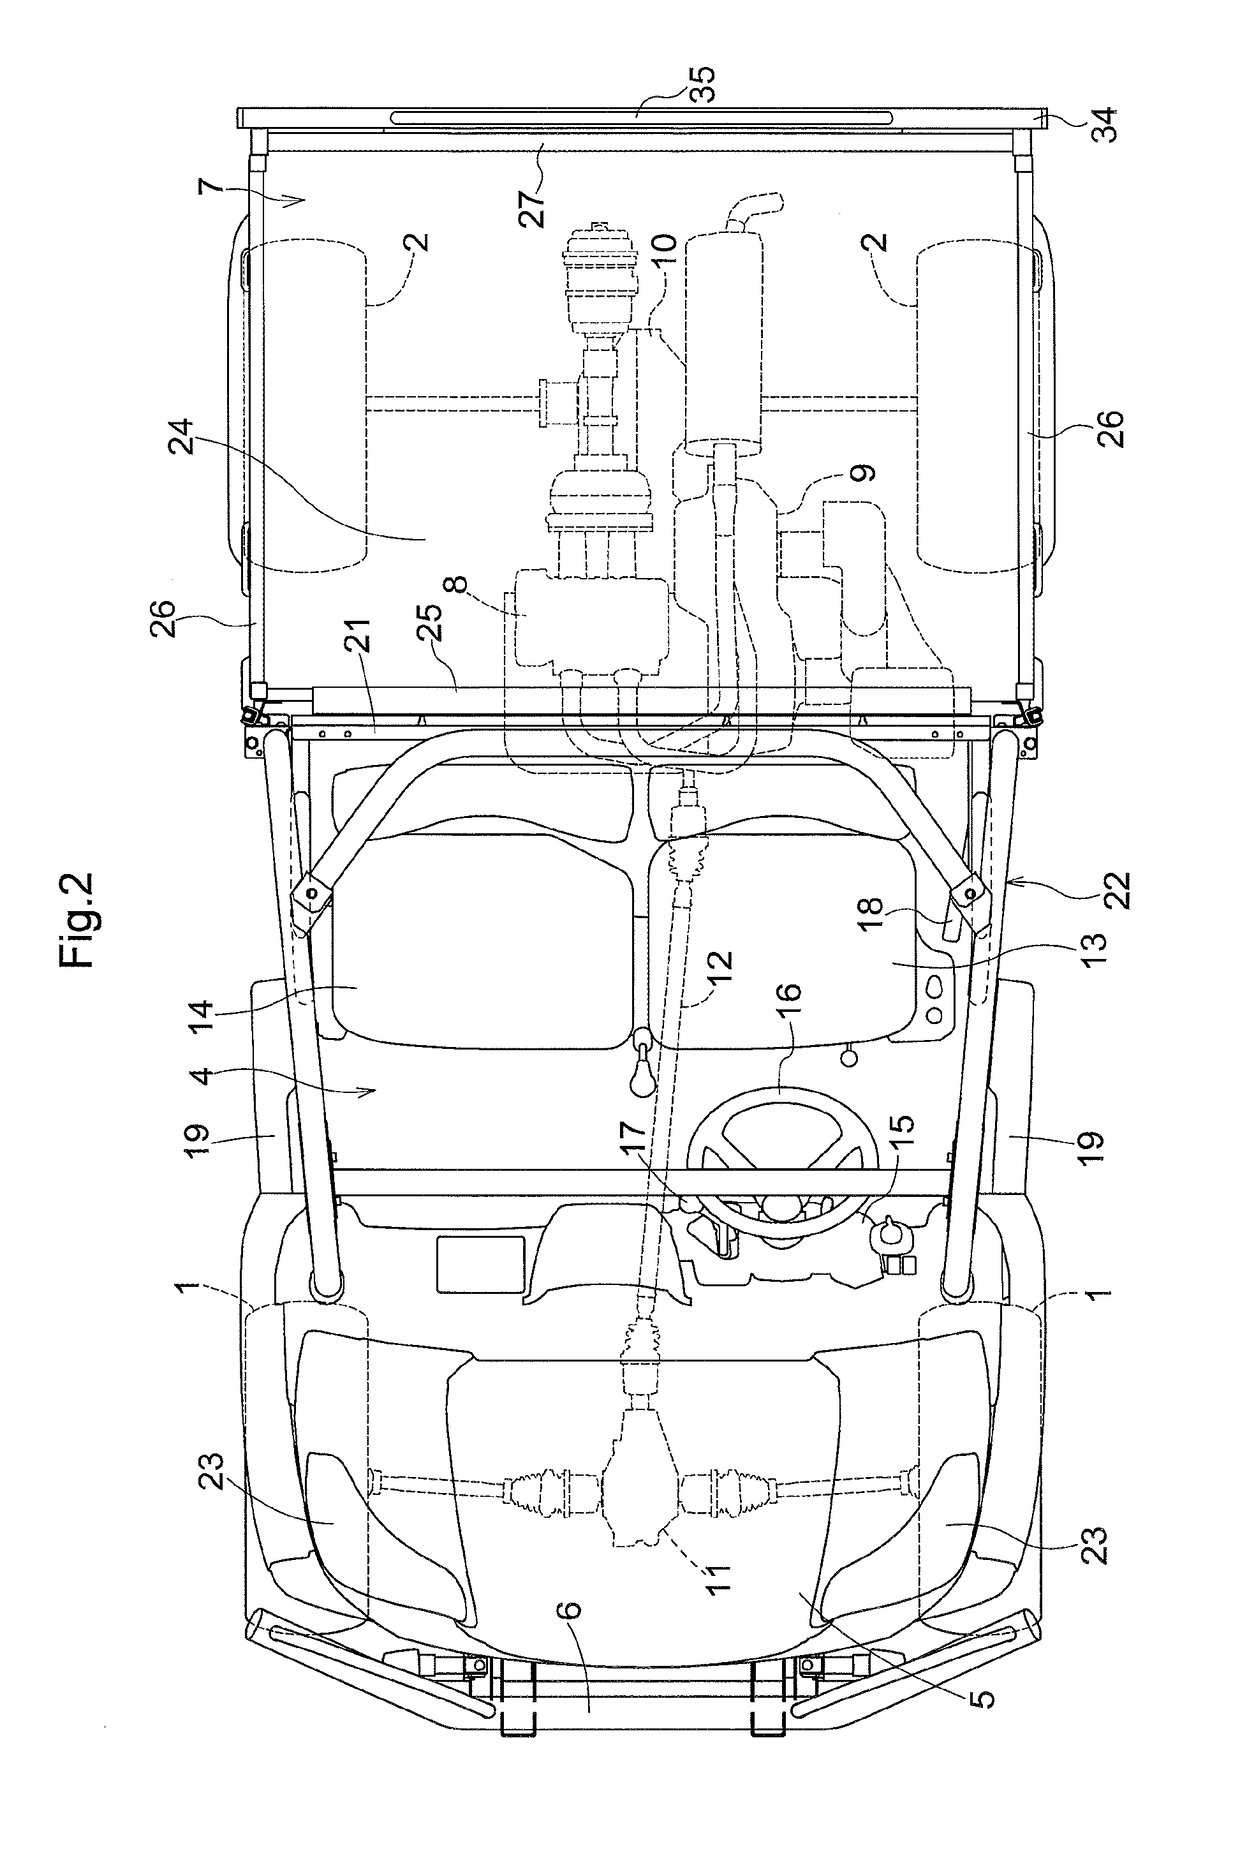 Vehicle Having a Load Carrying Deck and Attachment Device for the Same